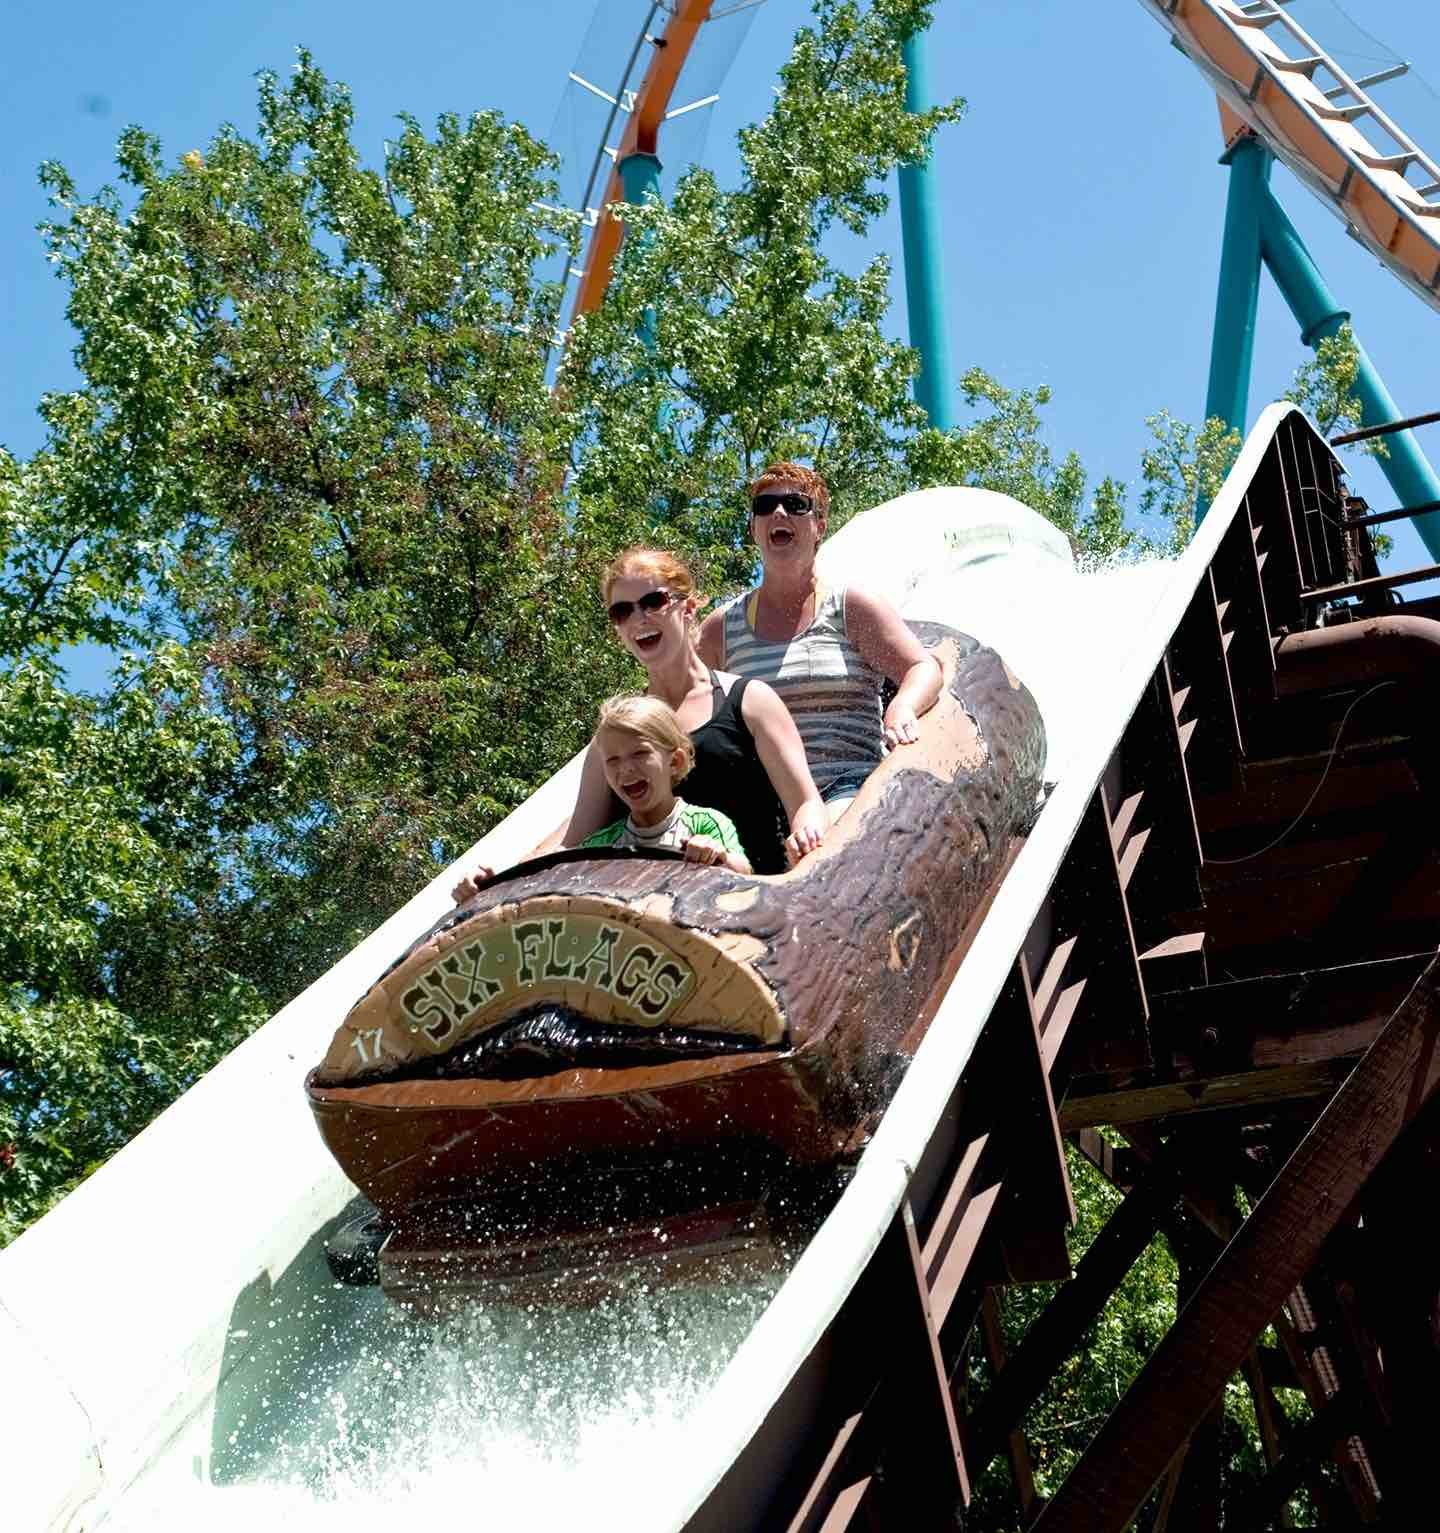 Unamused: A timeline of incidents and deaths at Six Flags Over Georgia –  The Connector